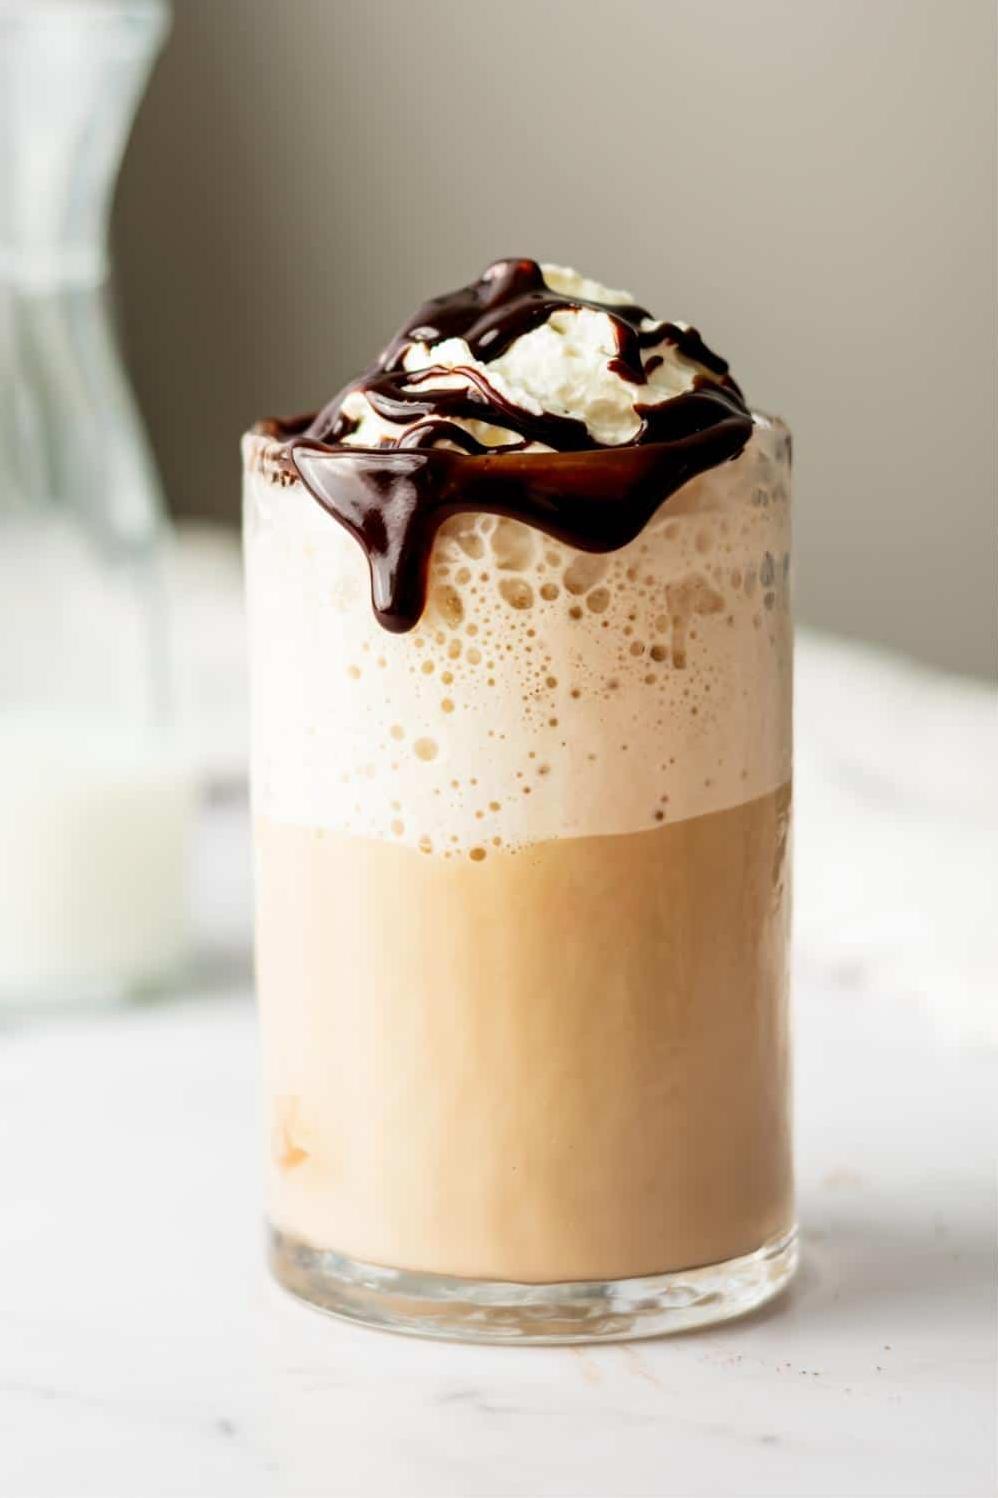  A smooth blend of espresso, milk, and chocolate sauce, all in one refreshing drink.